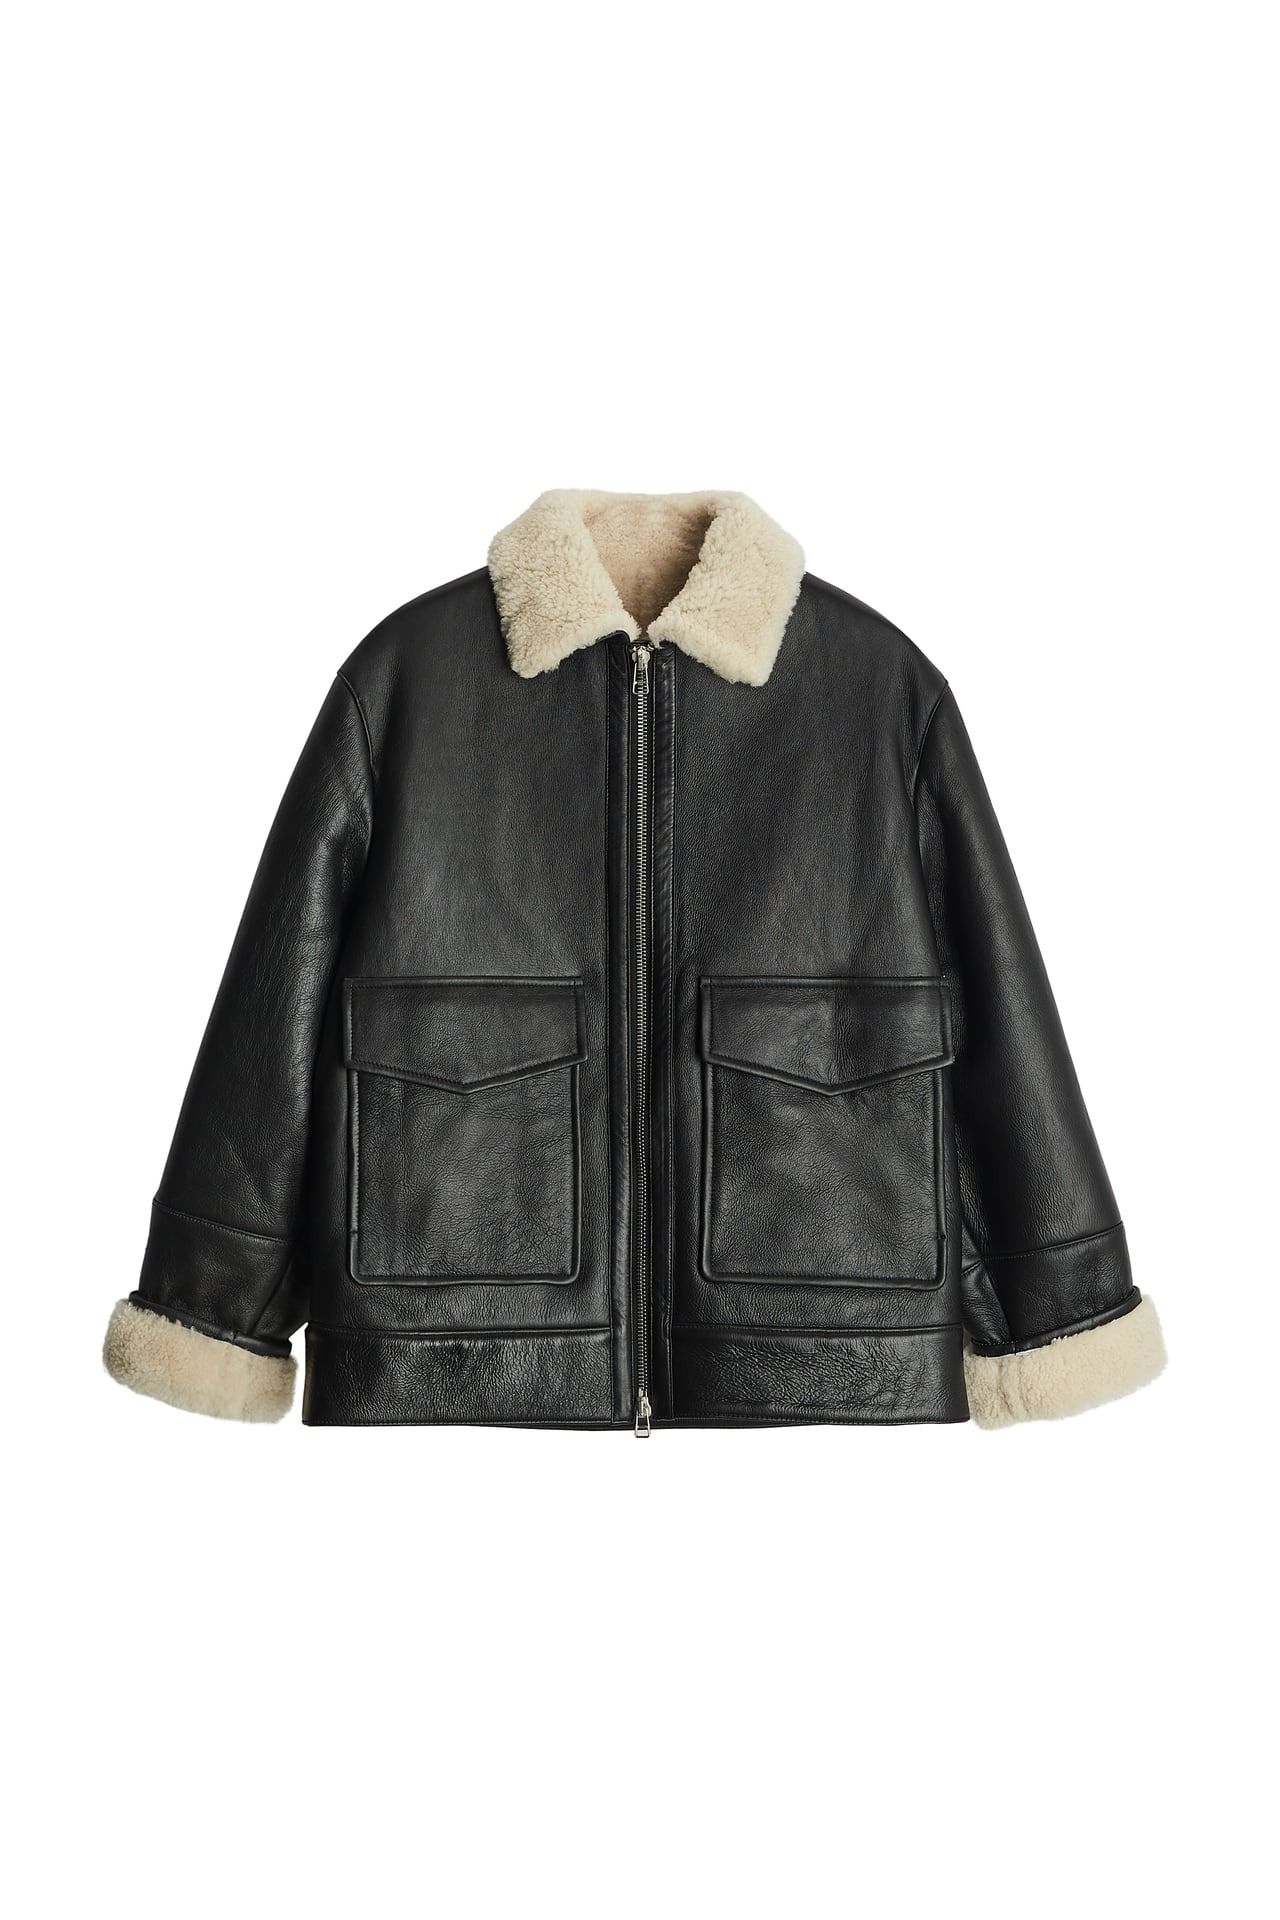 A $3500-Cheaper Zara Alt for Laura Harrier's Leather Jacket | Who What Wear